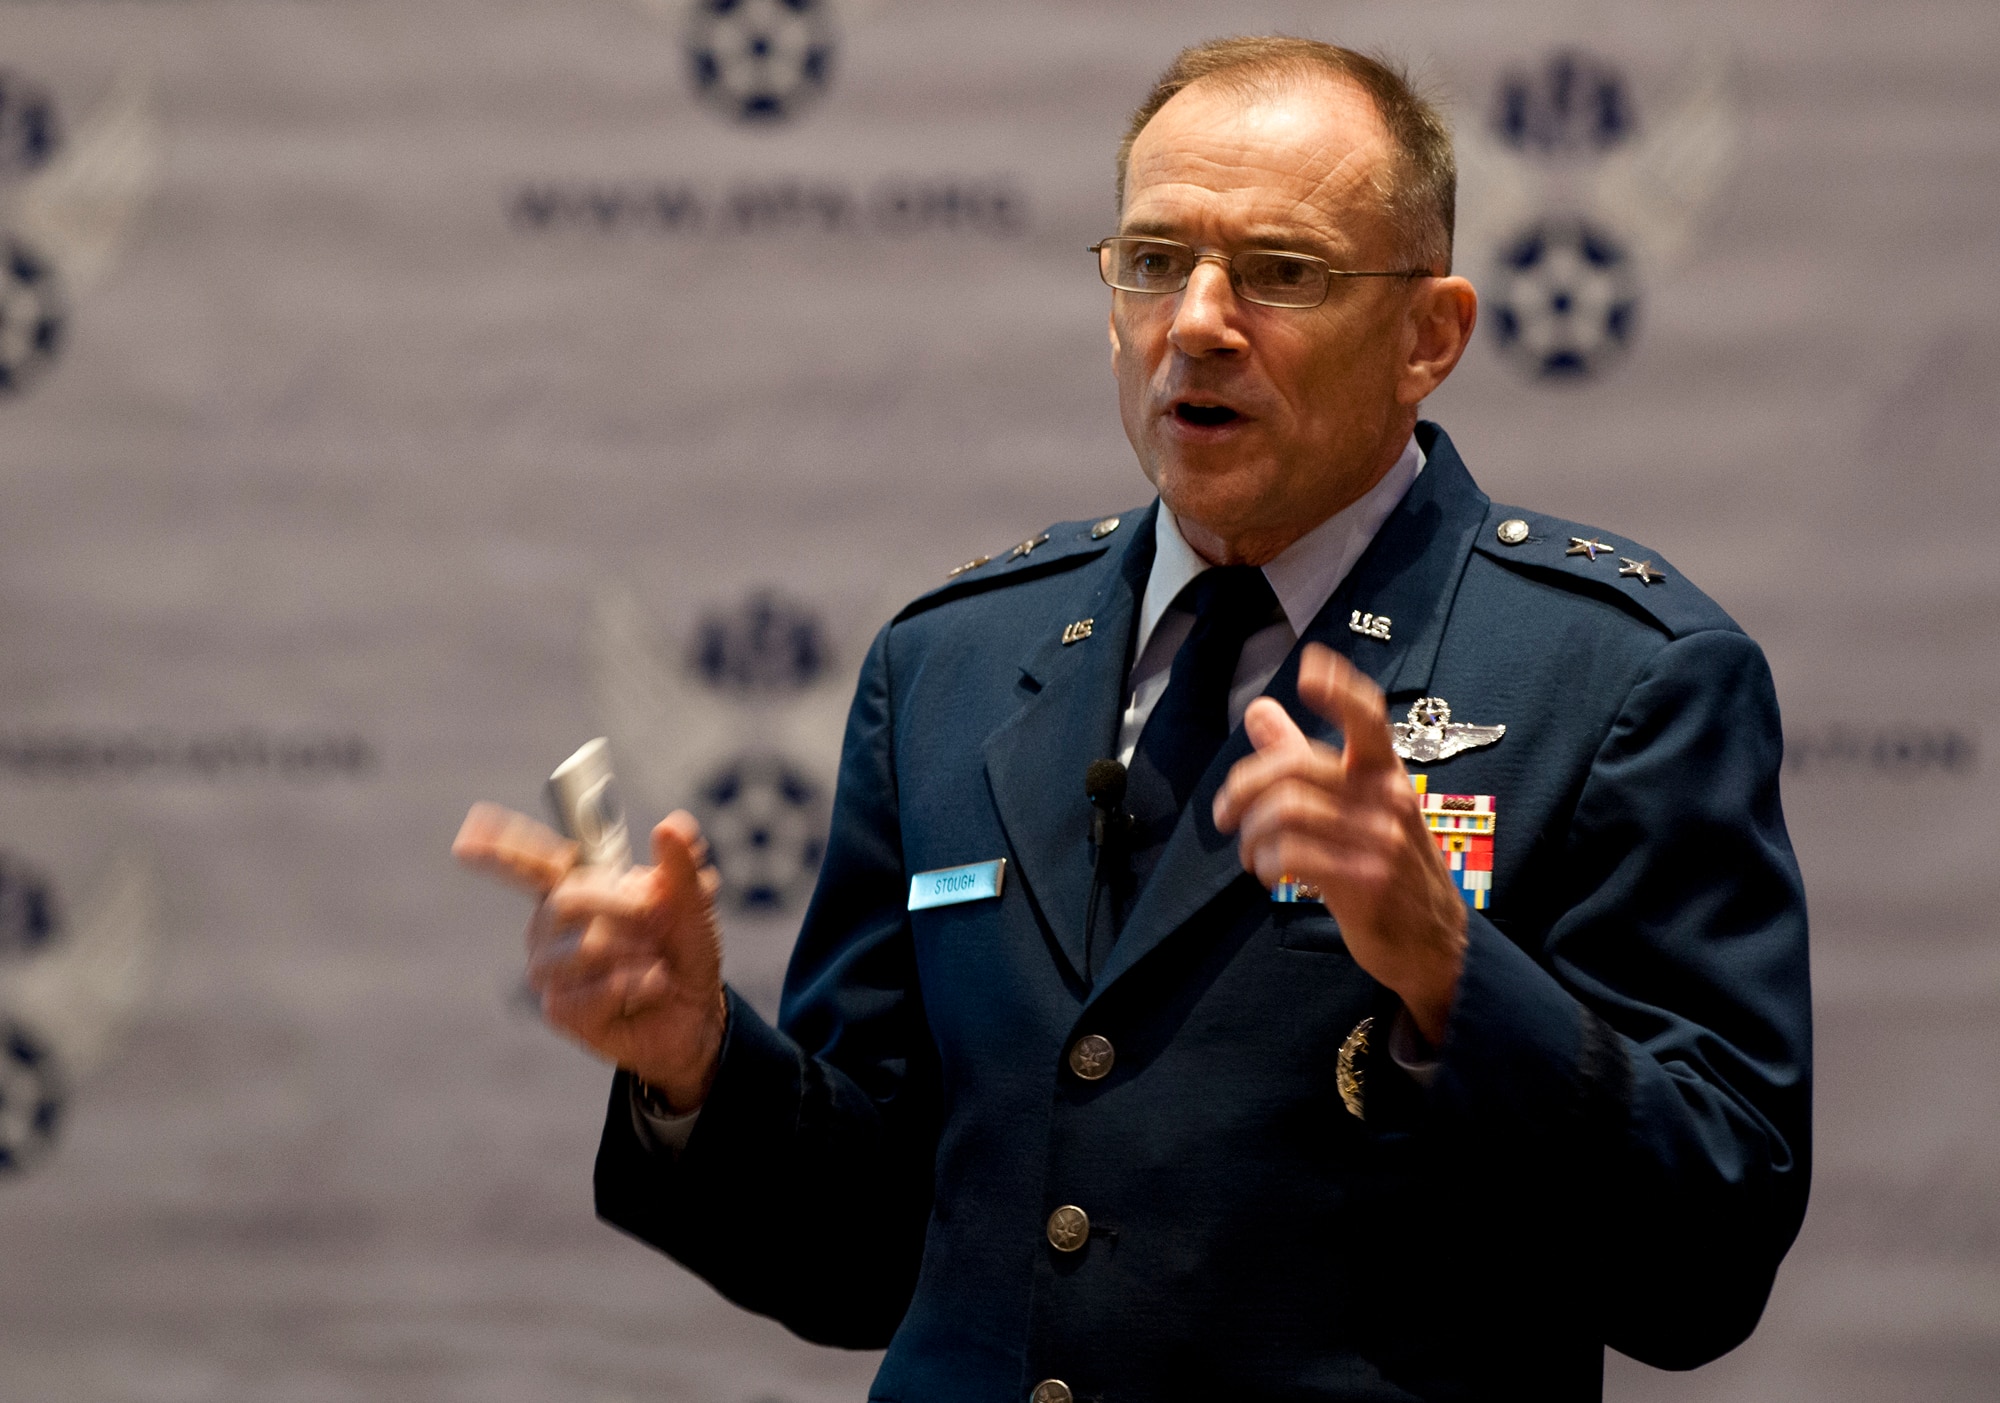 Maj. Gen. Michael S. Stough, director of strategic plans, requirements and programs for the Air Mobility Command discussed innovation and technology that will shape the total force mobility enterprise in the coming years during an AMC requirements brief at the 2014 Air Force Association Air and Space Conference and Technology Exposition, Washington, D.C., Sept. 16, 2014. (U.S. Air Force Photo/Staff Sgt. Carlin Leslie). 